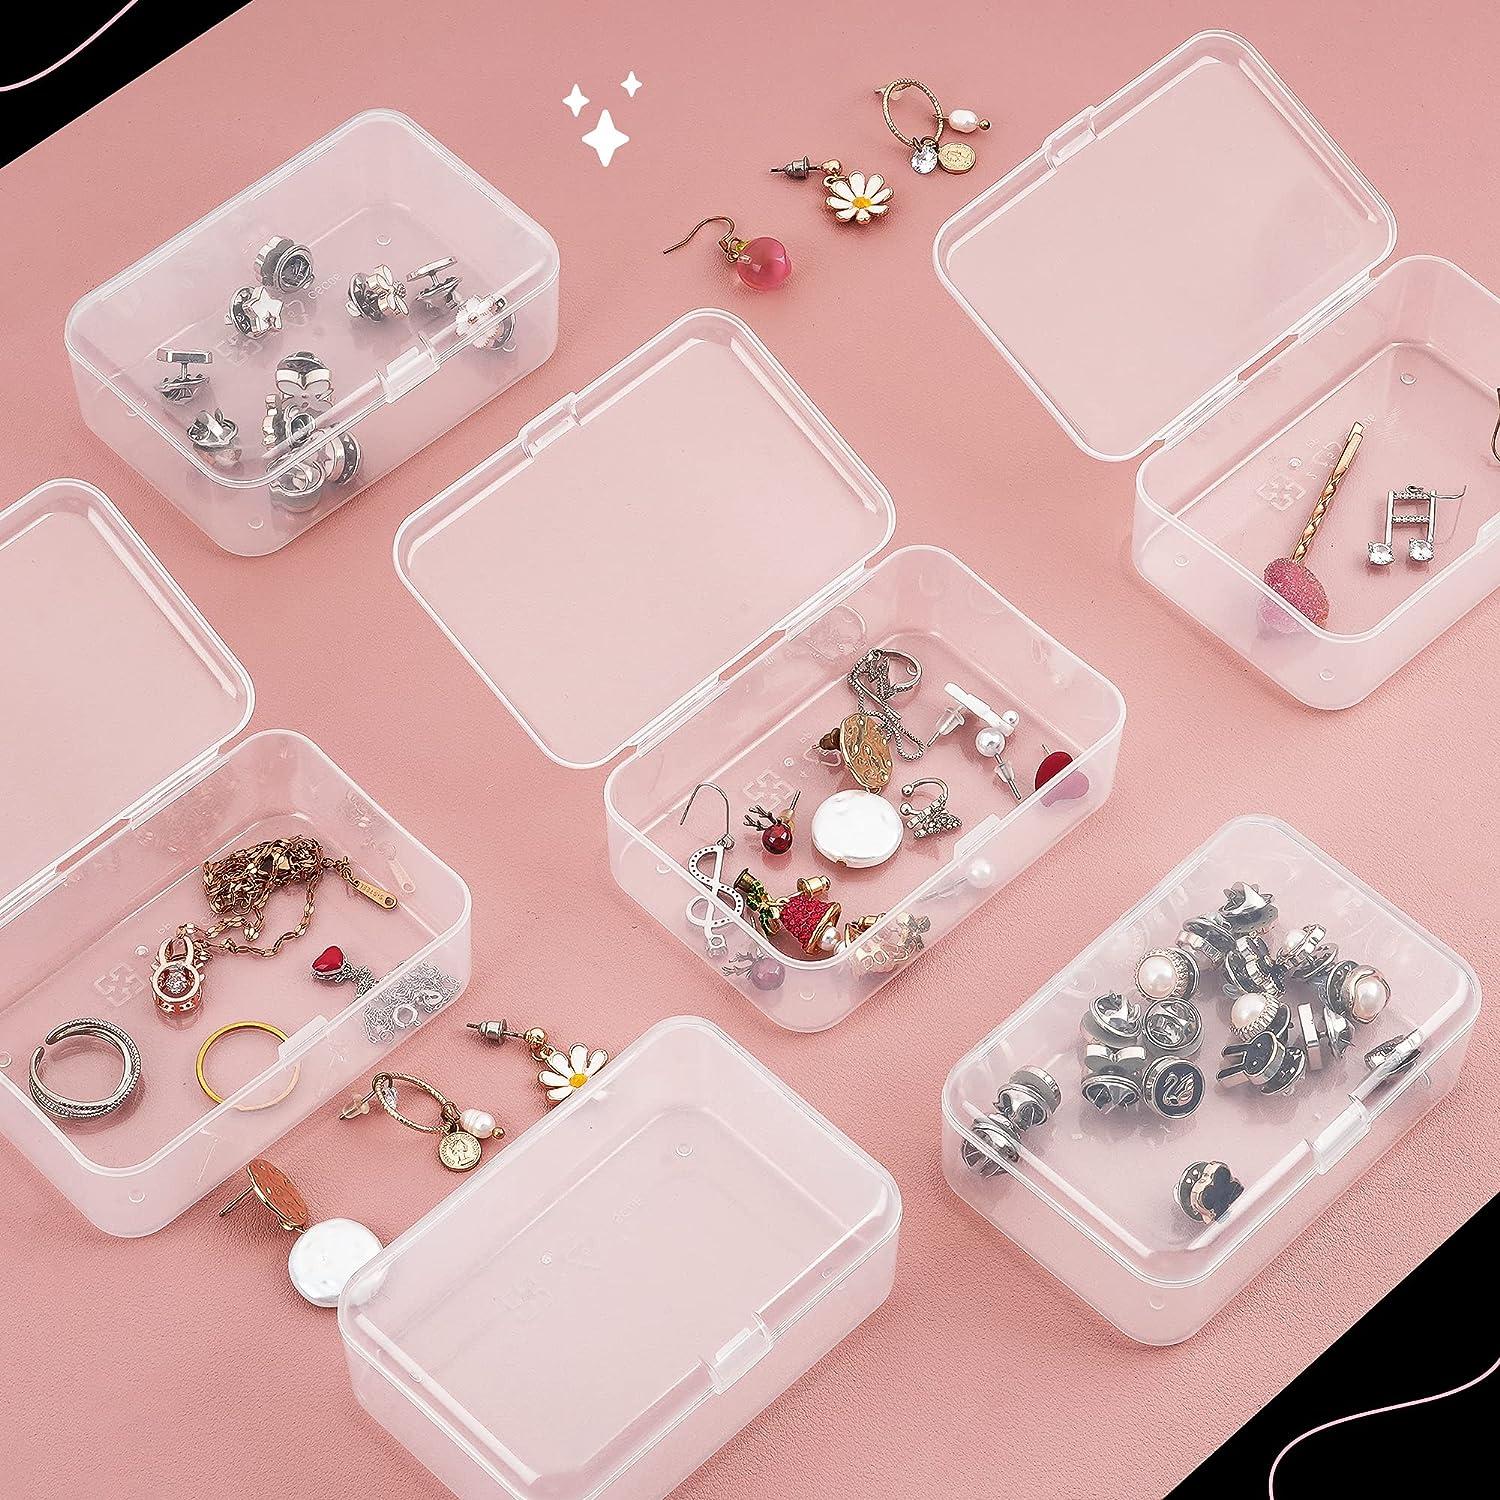 Nail Charm Rhinestone Storage Box Multi-compartments Clear Acrylic Magnetic  Cover Accessories Nail Art Beads Organizer Container